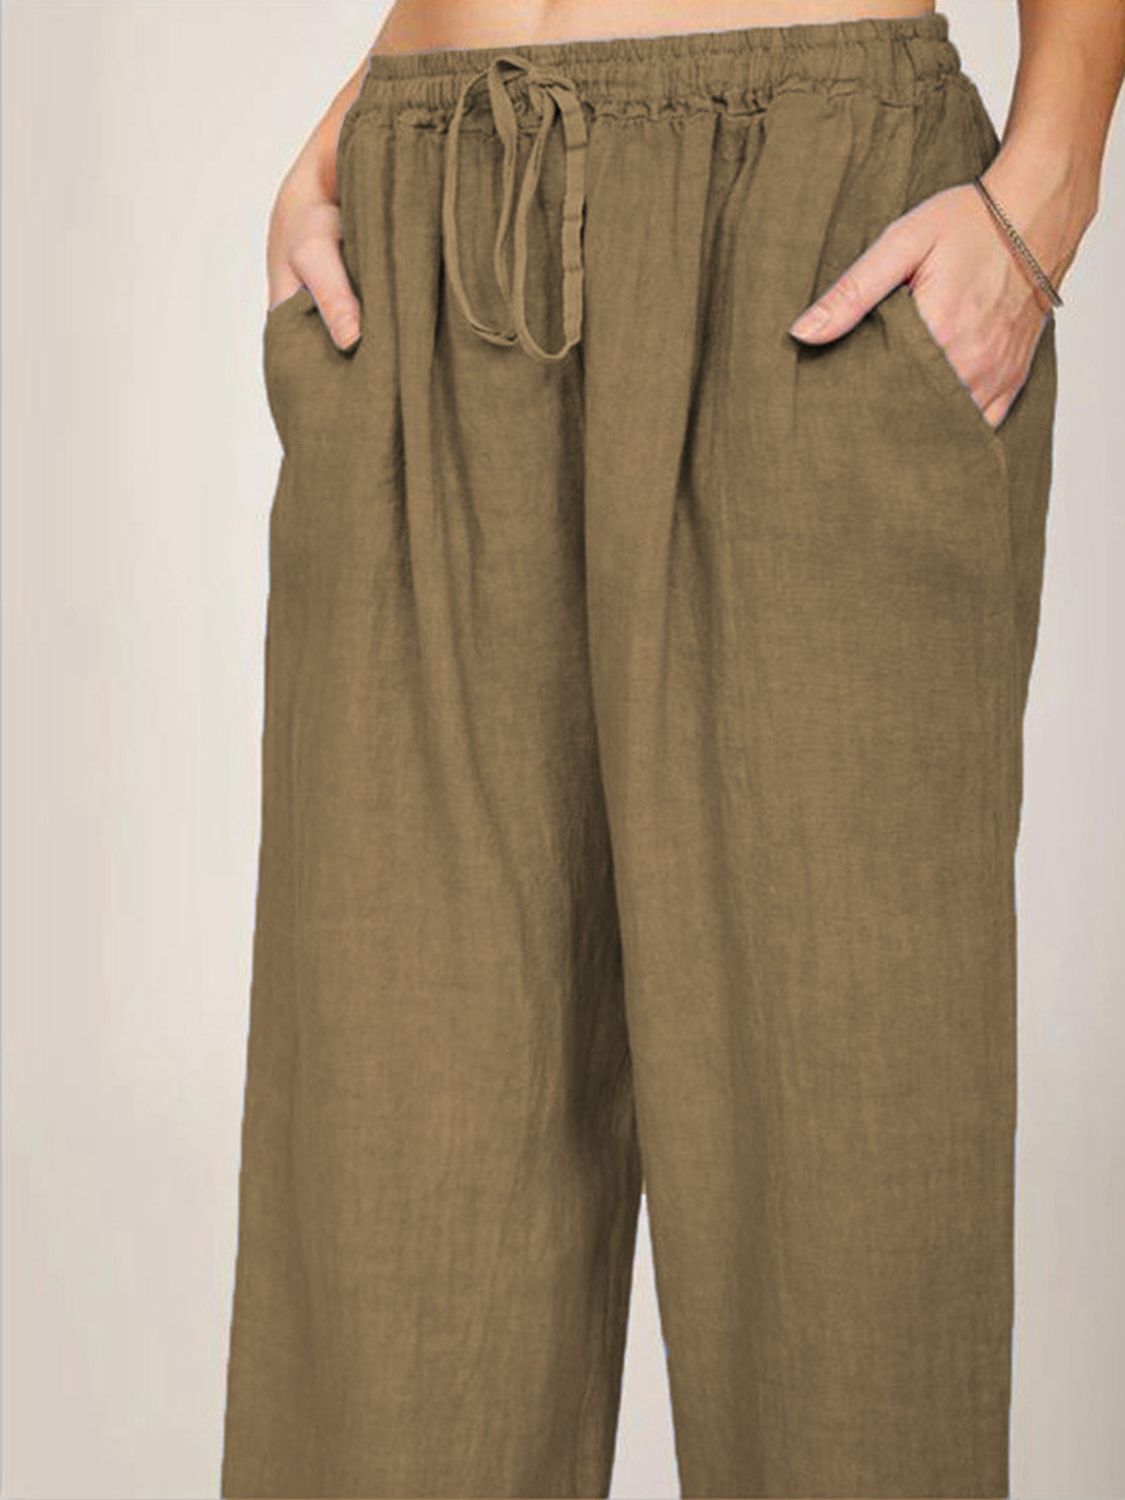 Dim Gray Full Size Long Pants Sentient Beauty Fashions Apparel &amp; Accessories